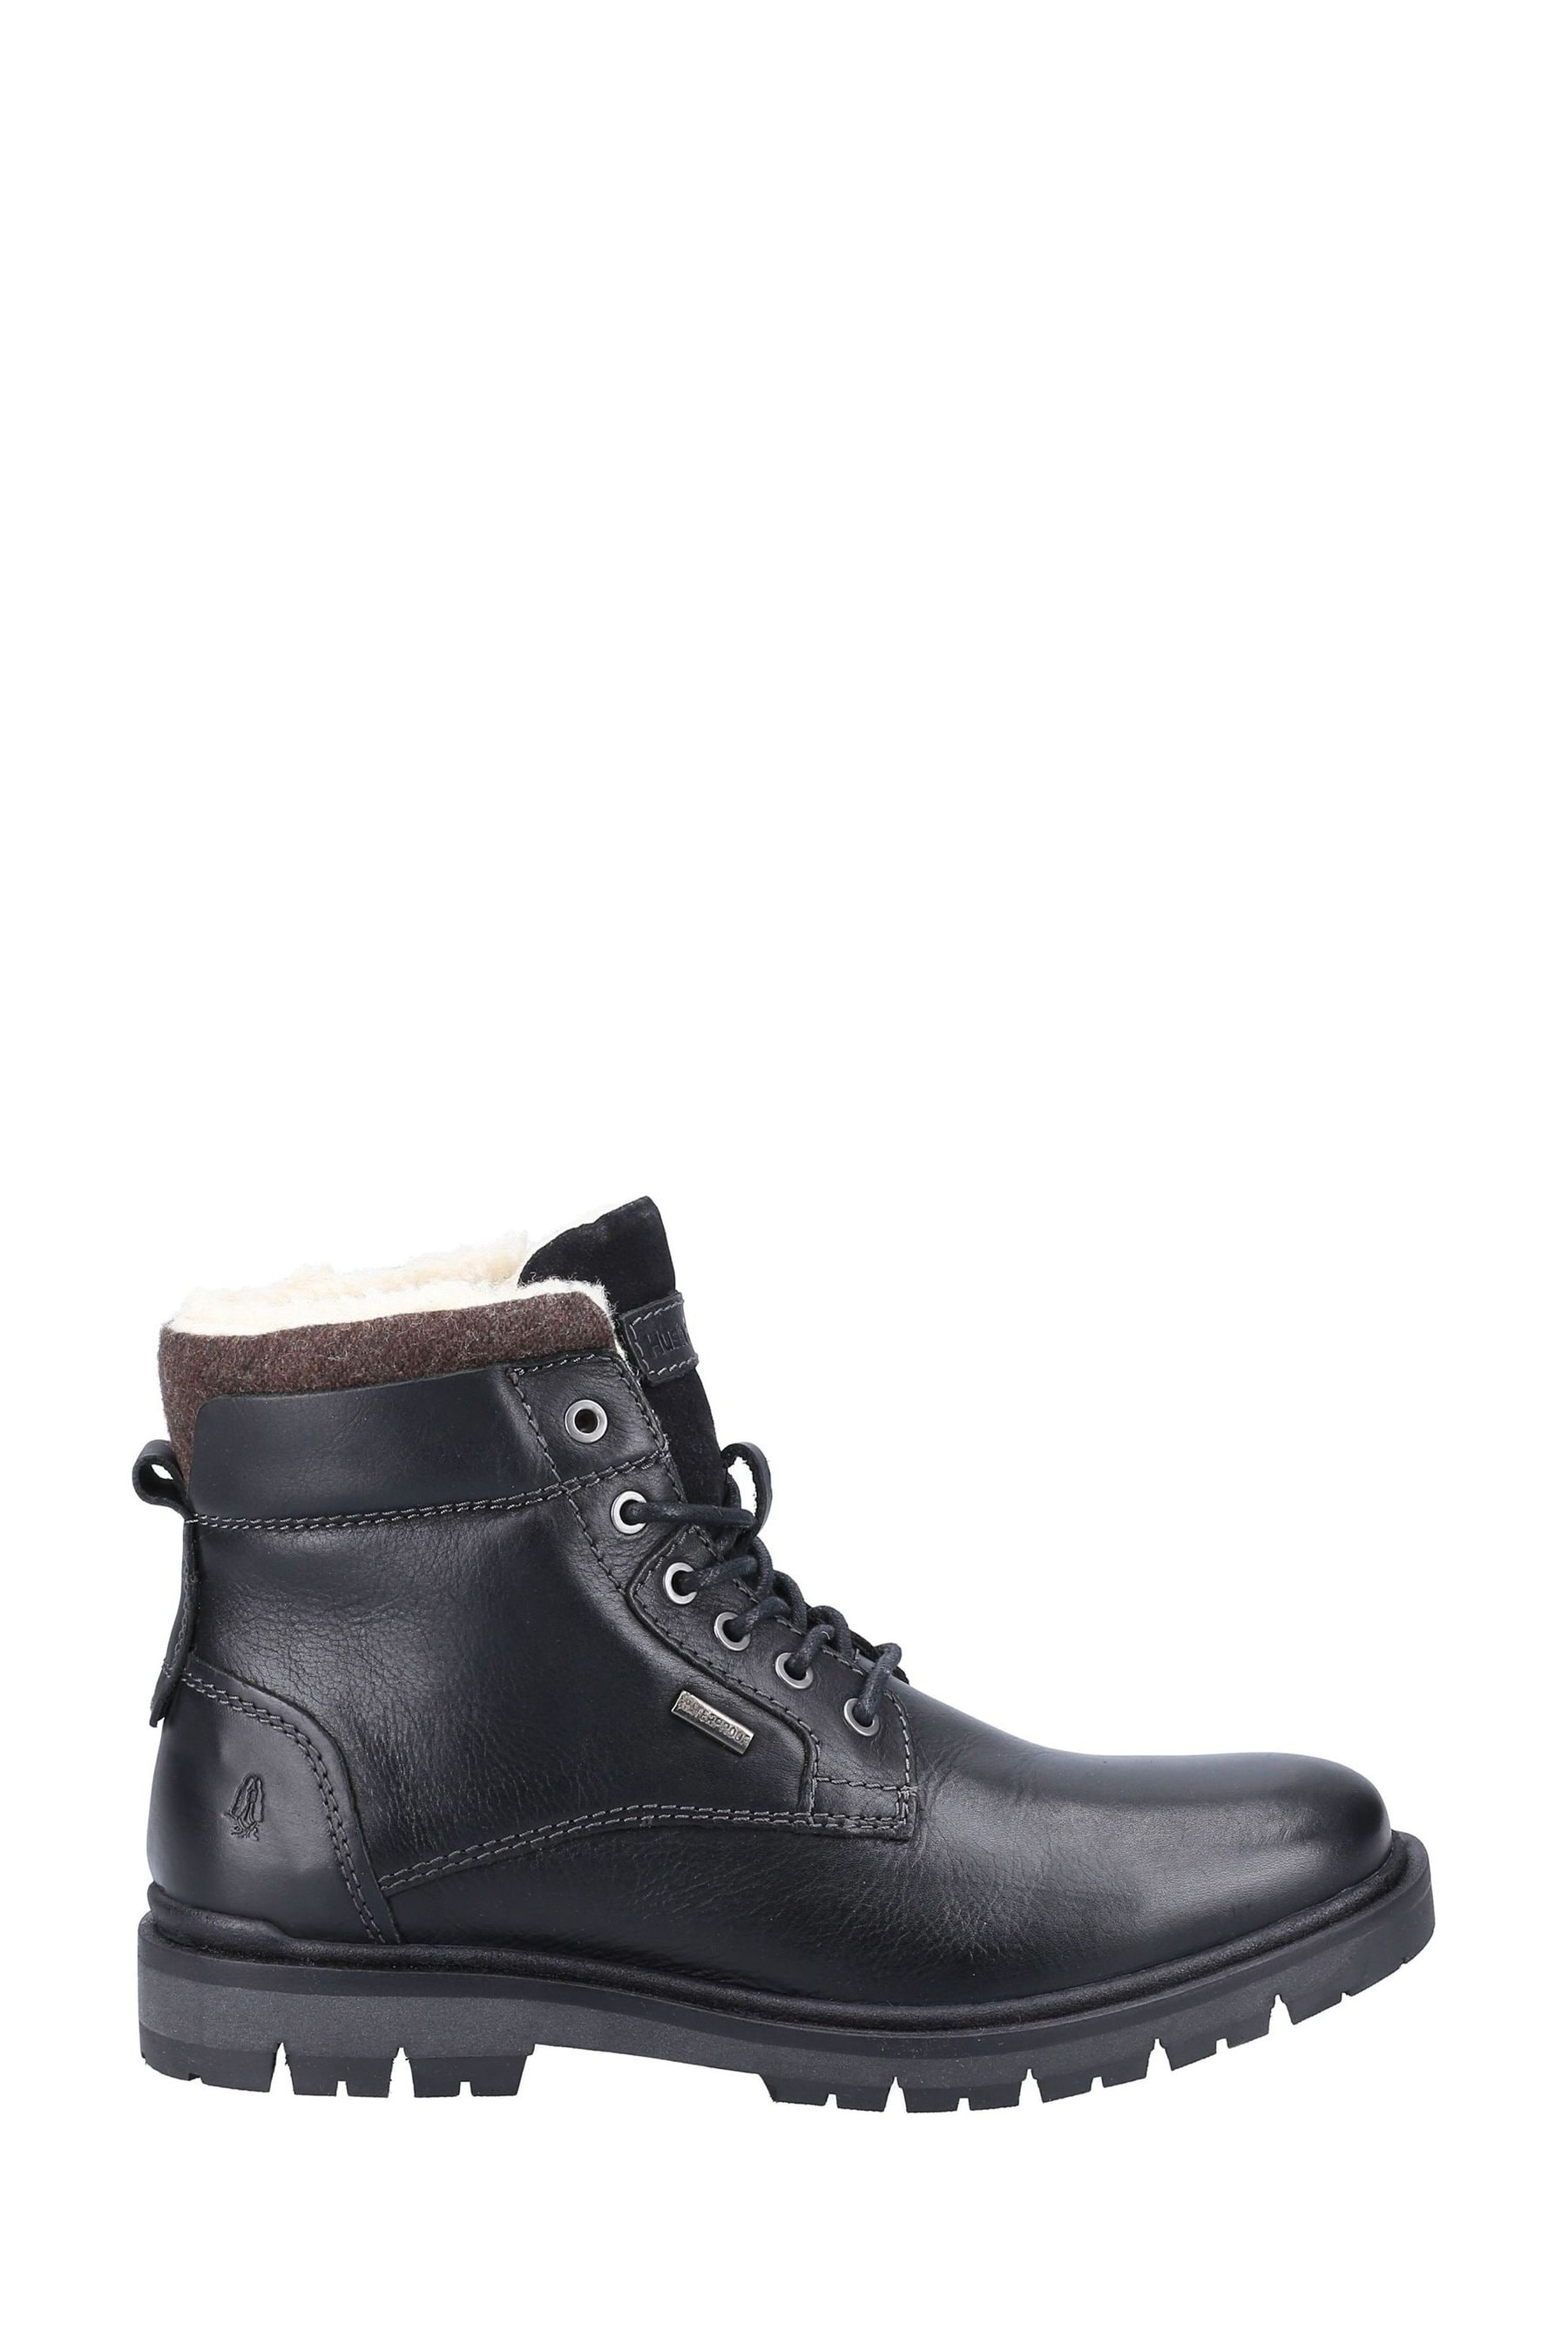 Buy Hush Puppies Patrick Ankle Boots from the Next UK online shop